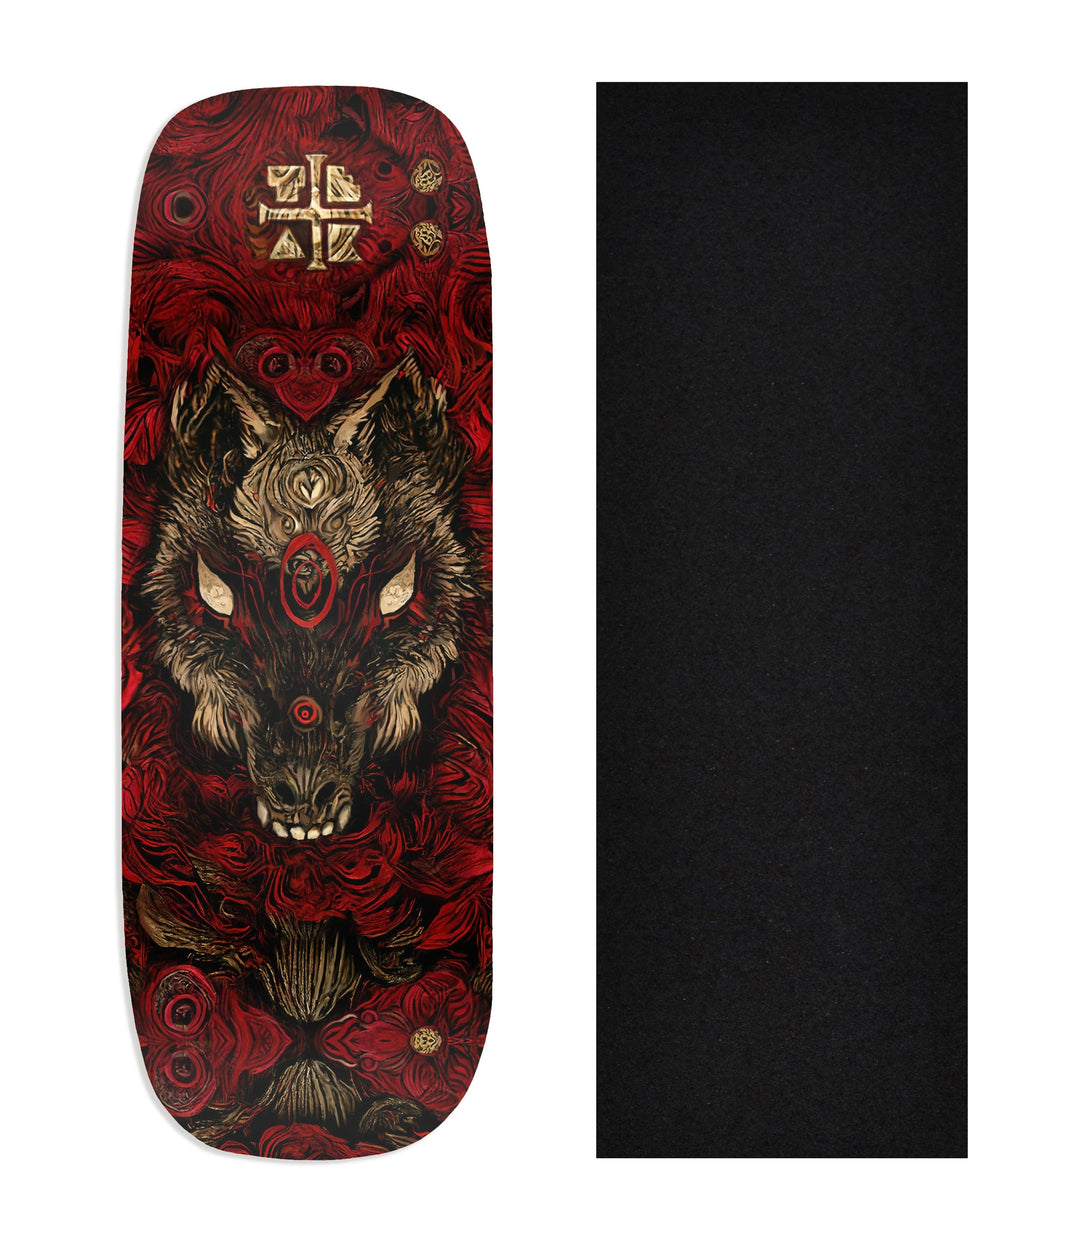 Teak Tuning Heat Transfer Graphic Wooden Fingerboard Deck, "Howl in the Night" Boxy Deck